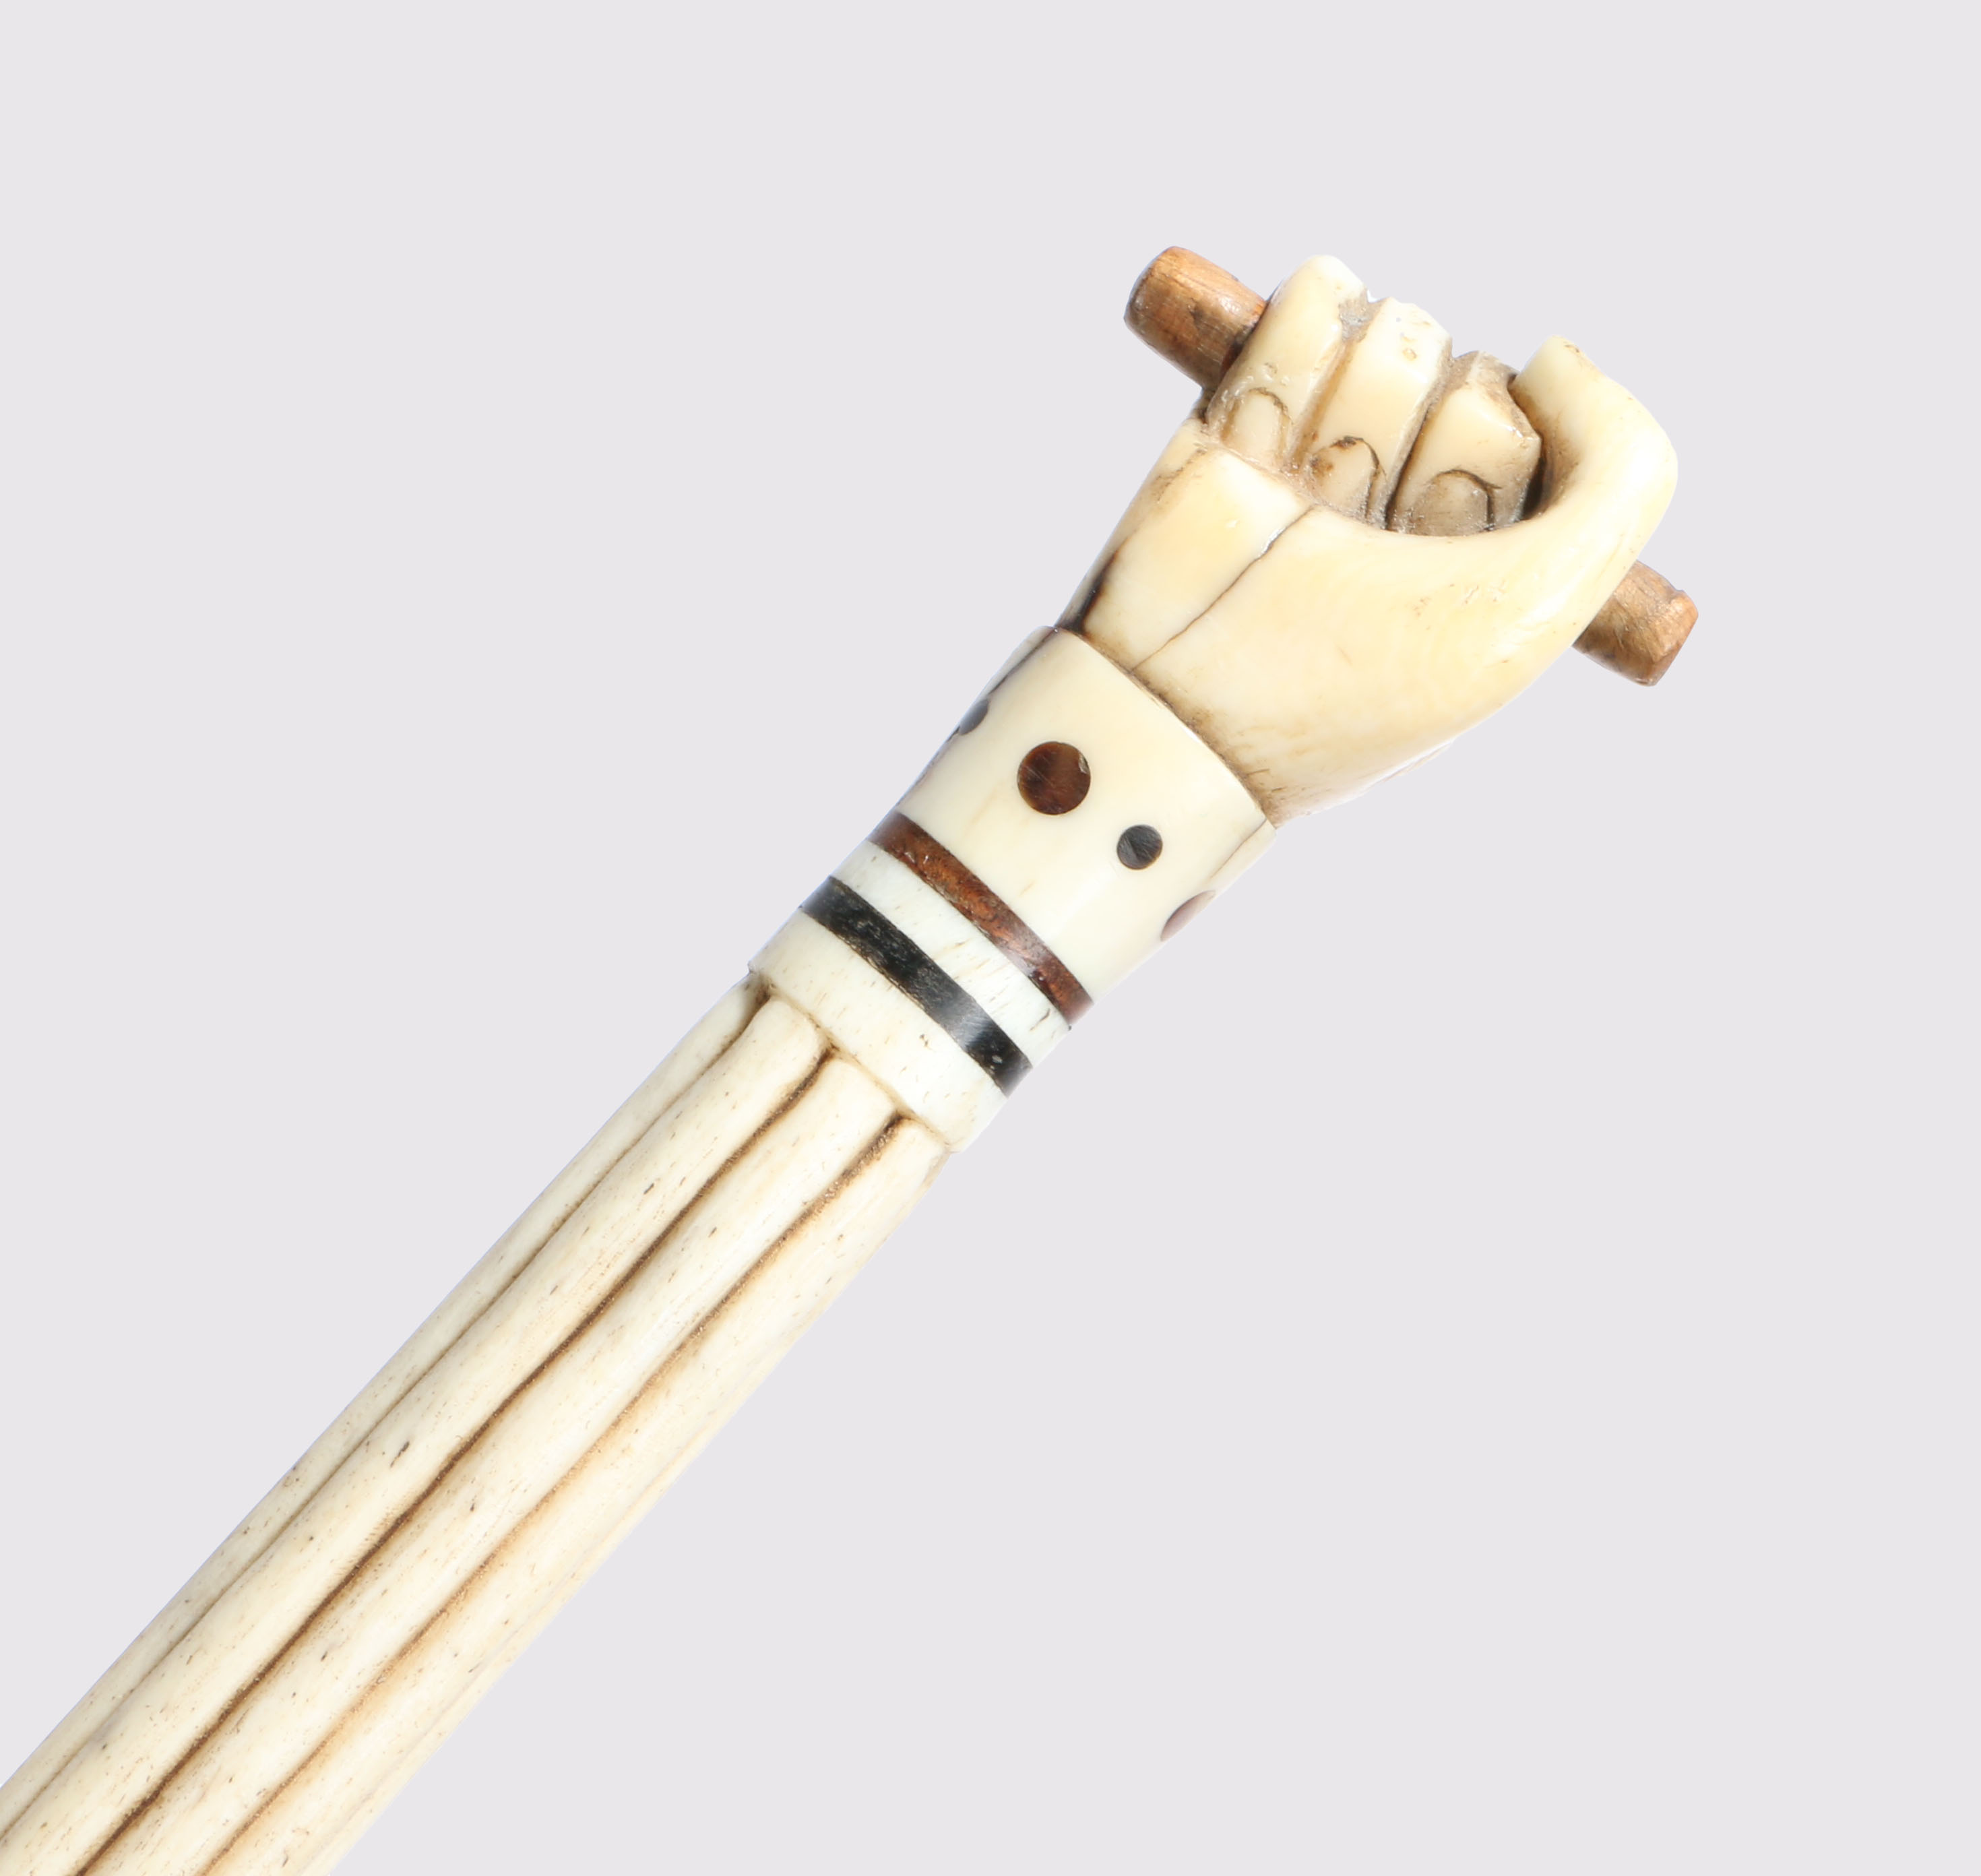 A George III whalebone and baleen walking stick, the handle in the form of a clenched fist holding a - Image 2 of 3